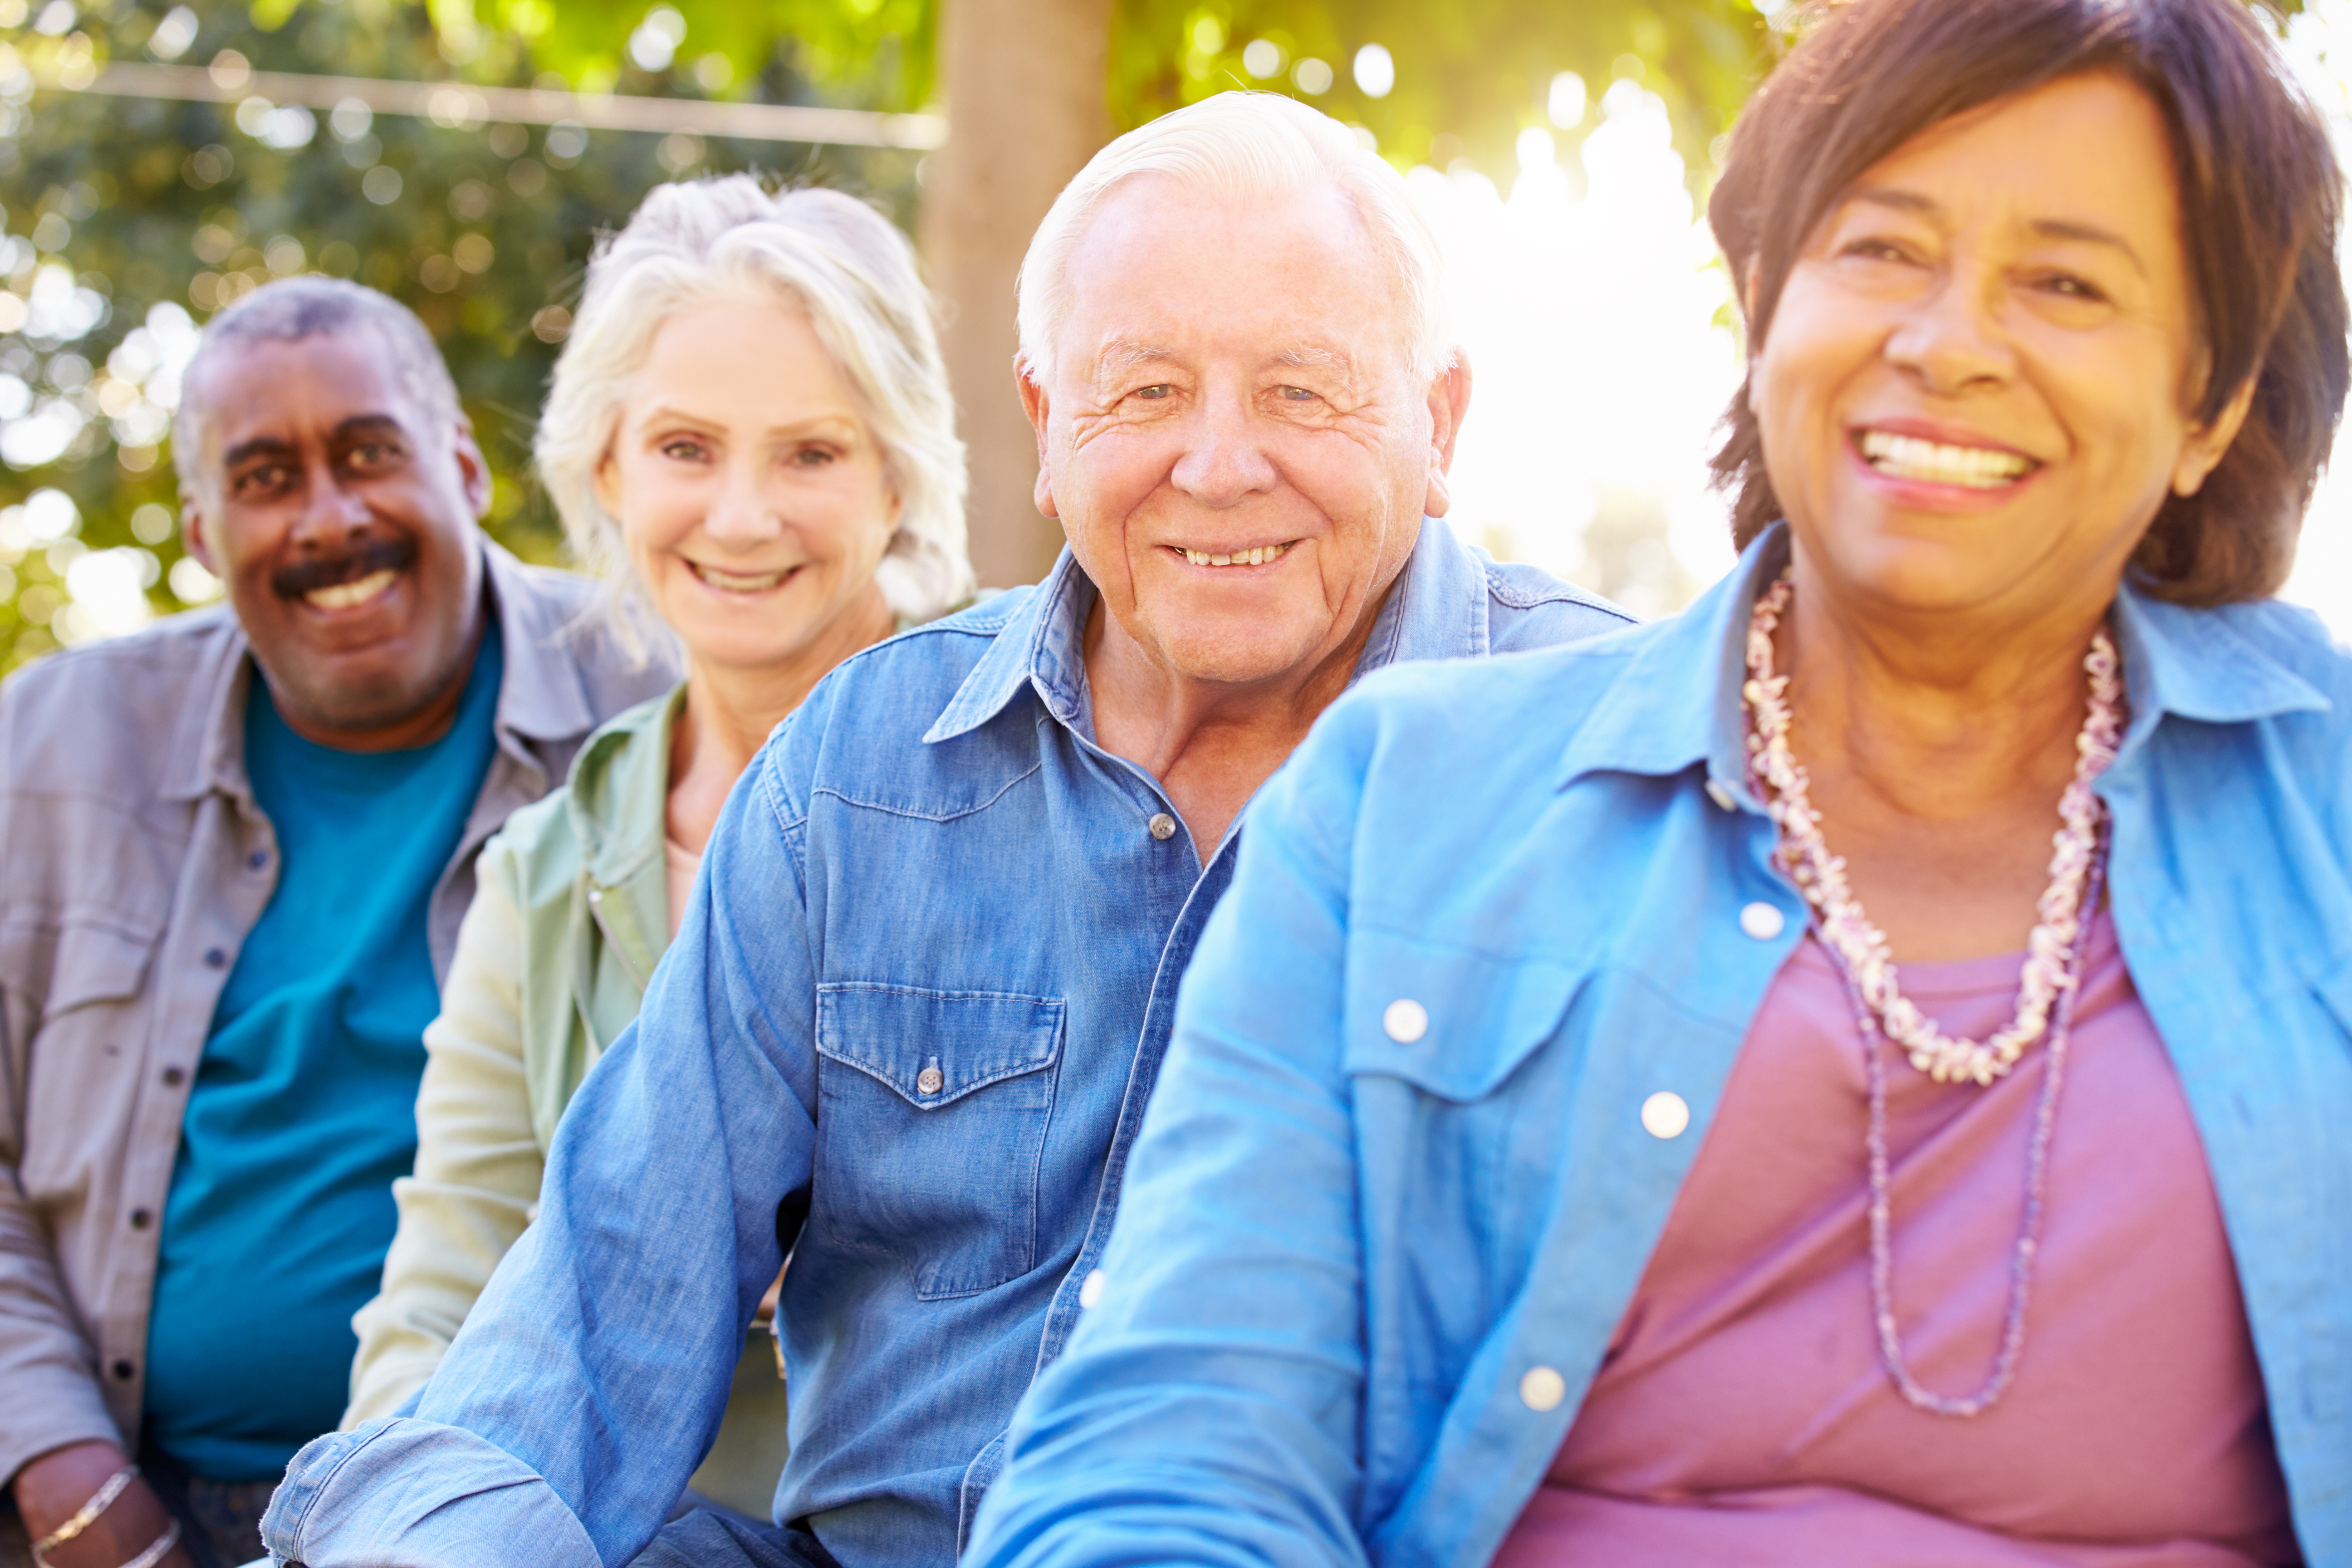 CADER is partnering with NCOA to bring its Behavioral Health in Aging Course nationwide .